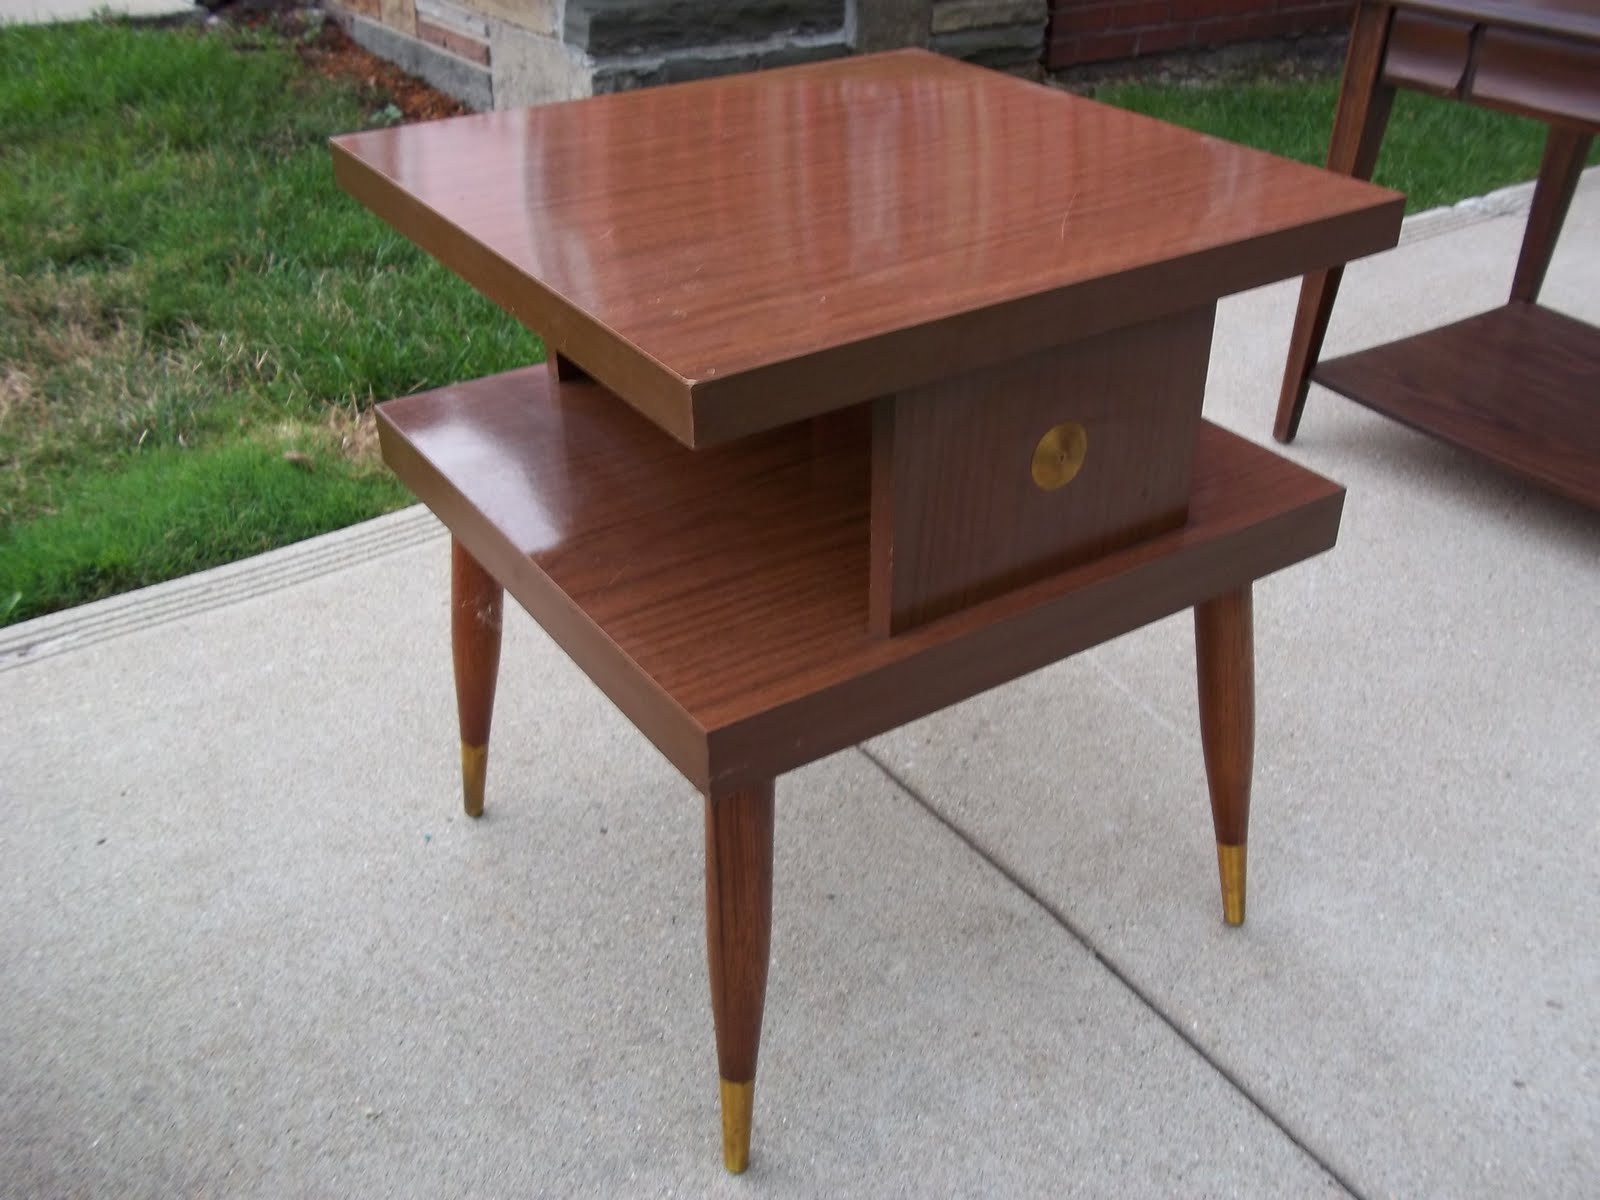 mid century tiered square side end accent table sold near perfect small laminate midcentury with solid wood legs gold medallion center and foot covers highlight this nice little